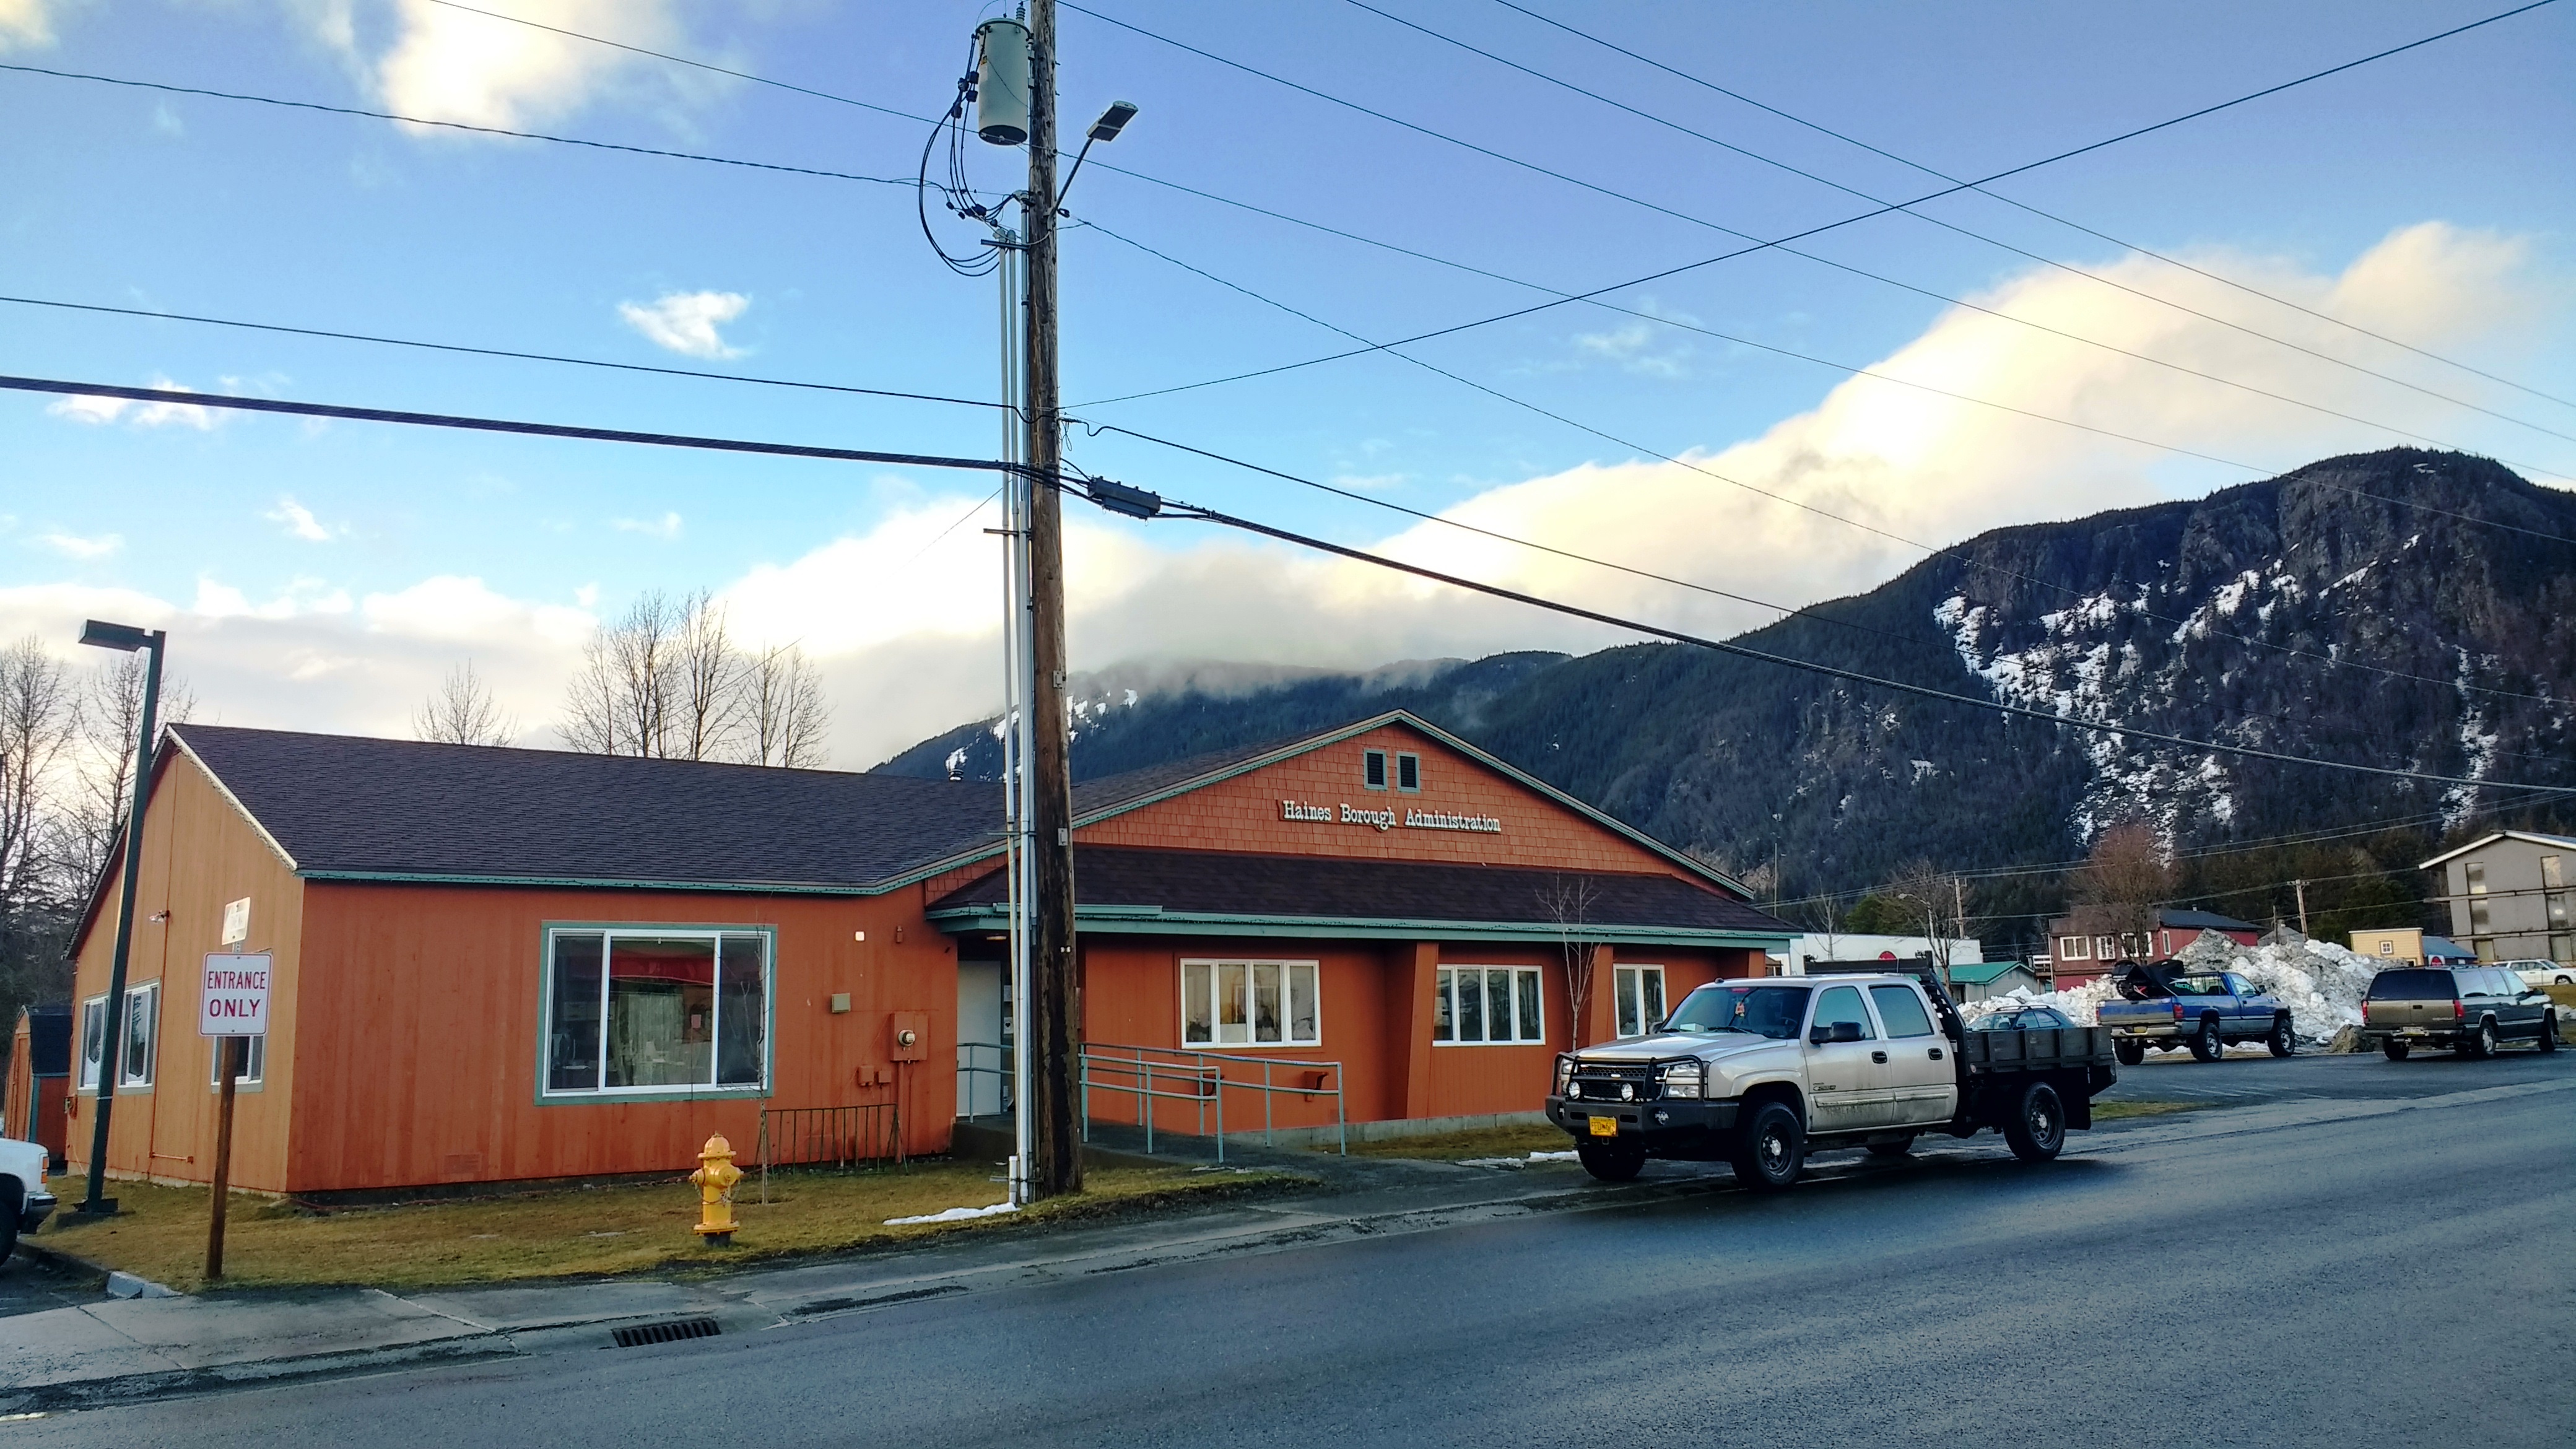 The Haines Borough Administration building. (Photo by Emily Files/KHNS))